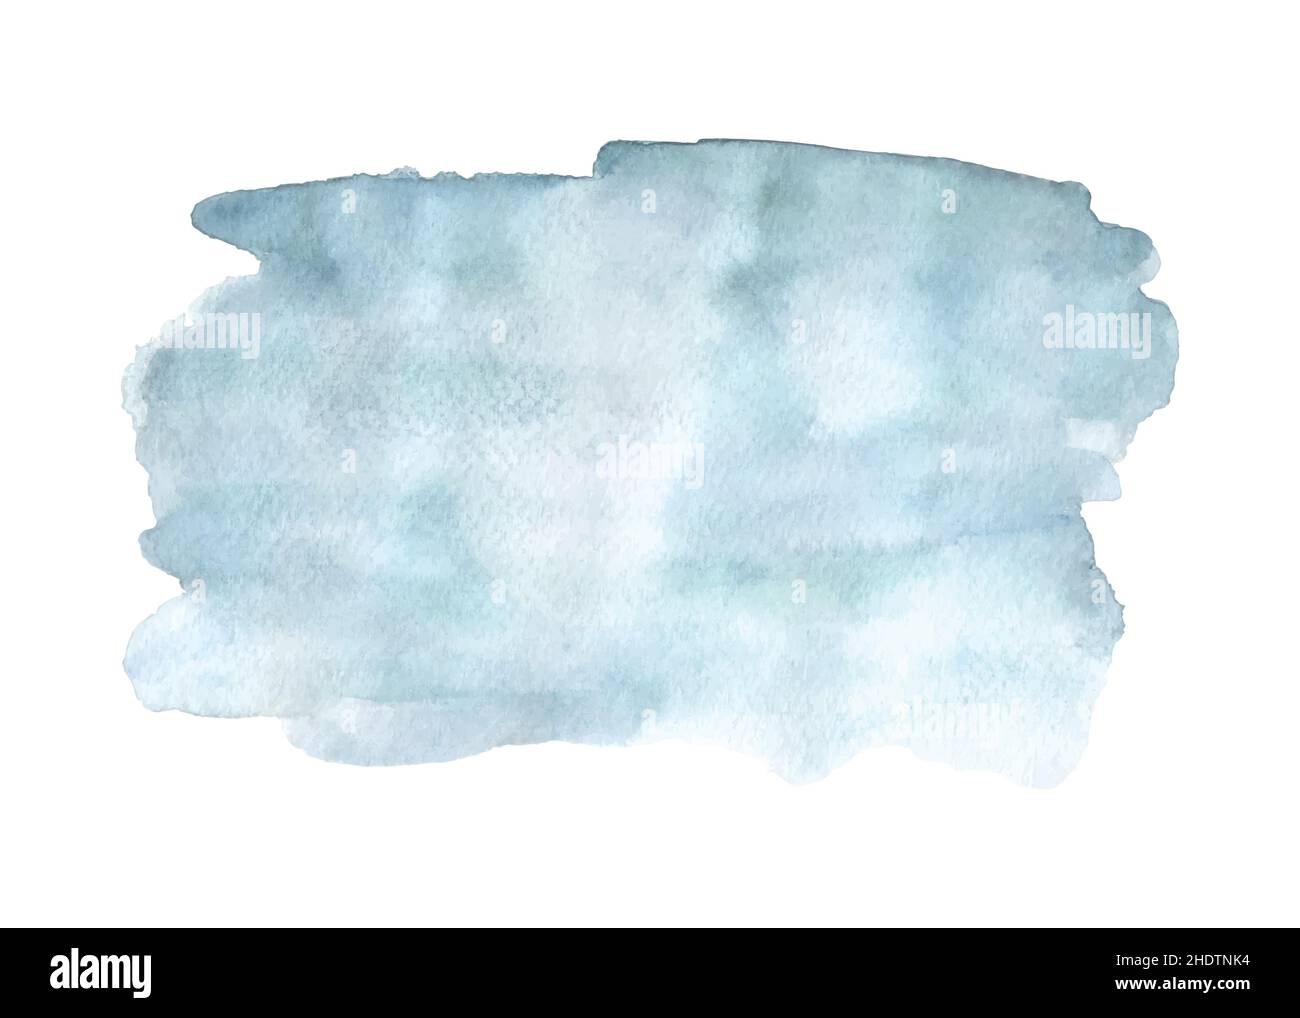 Abstract watercolor blue paint texture isolated on white background. Hand-painted watercolor splatter stains artistic vector used as being an element Stock Vector